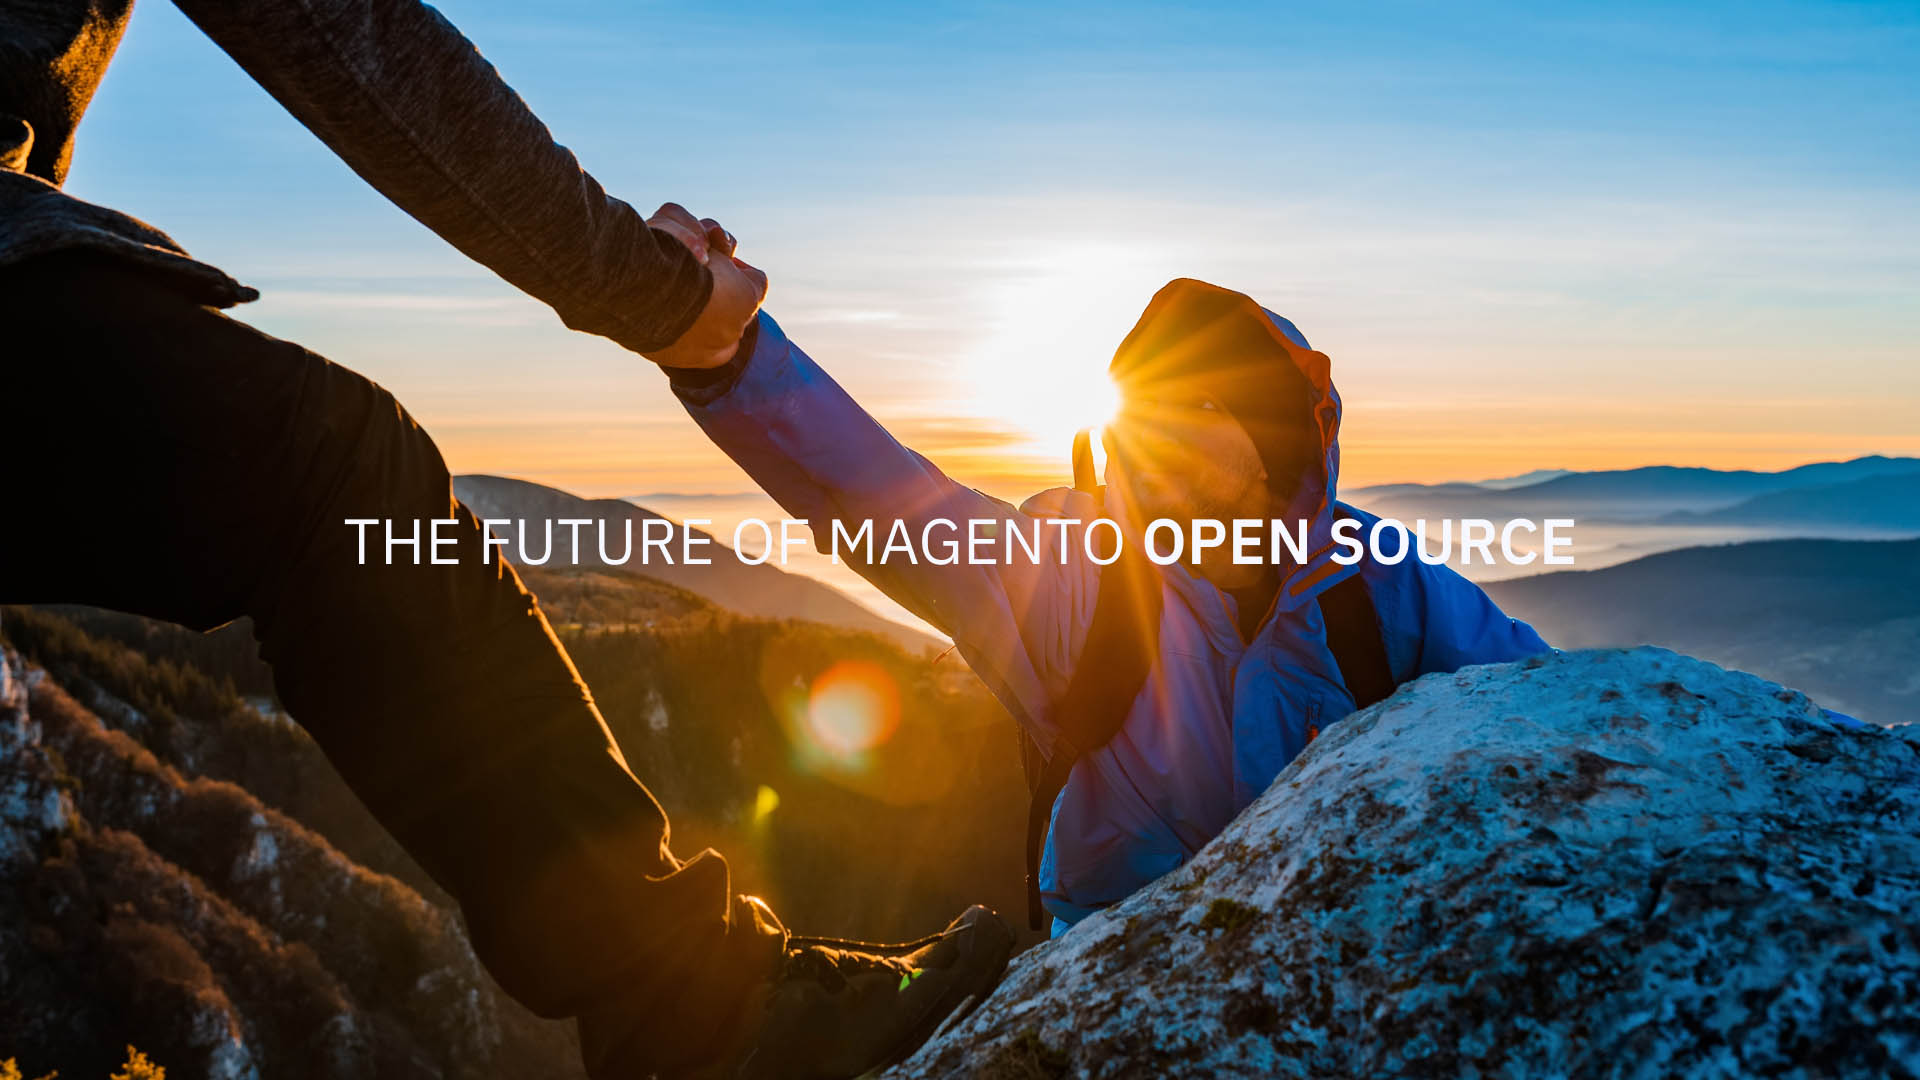 The Future of Magento Open Source